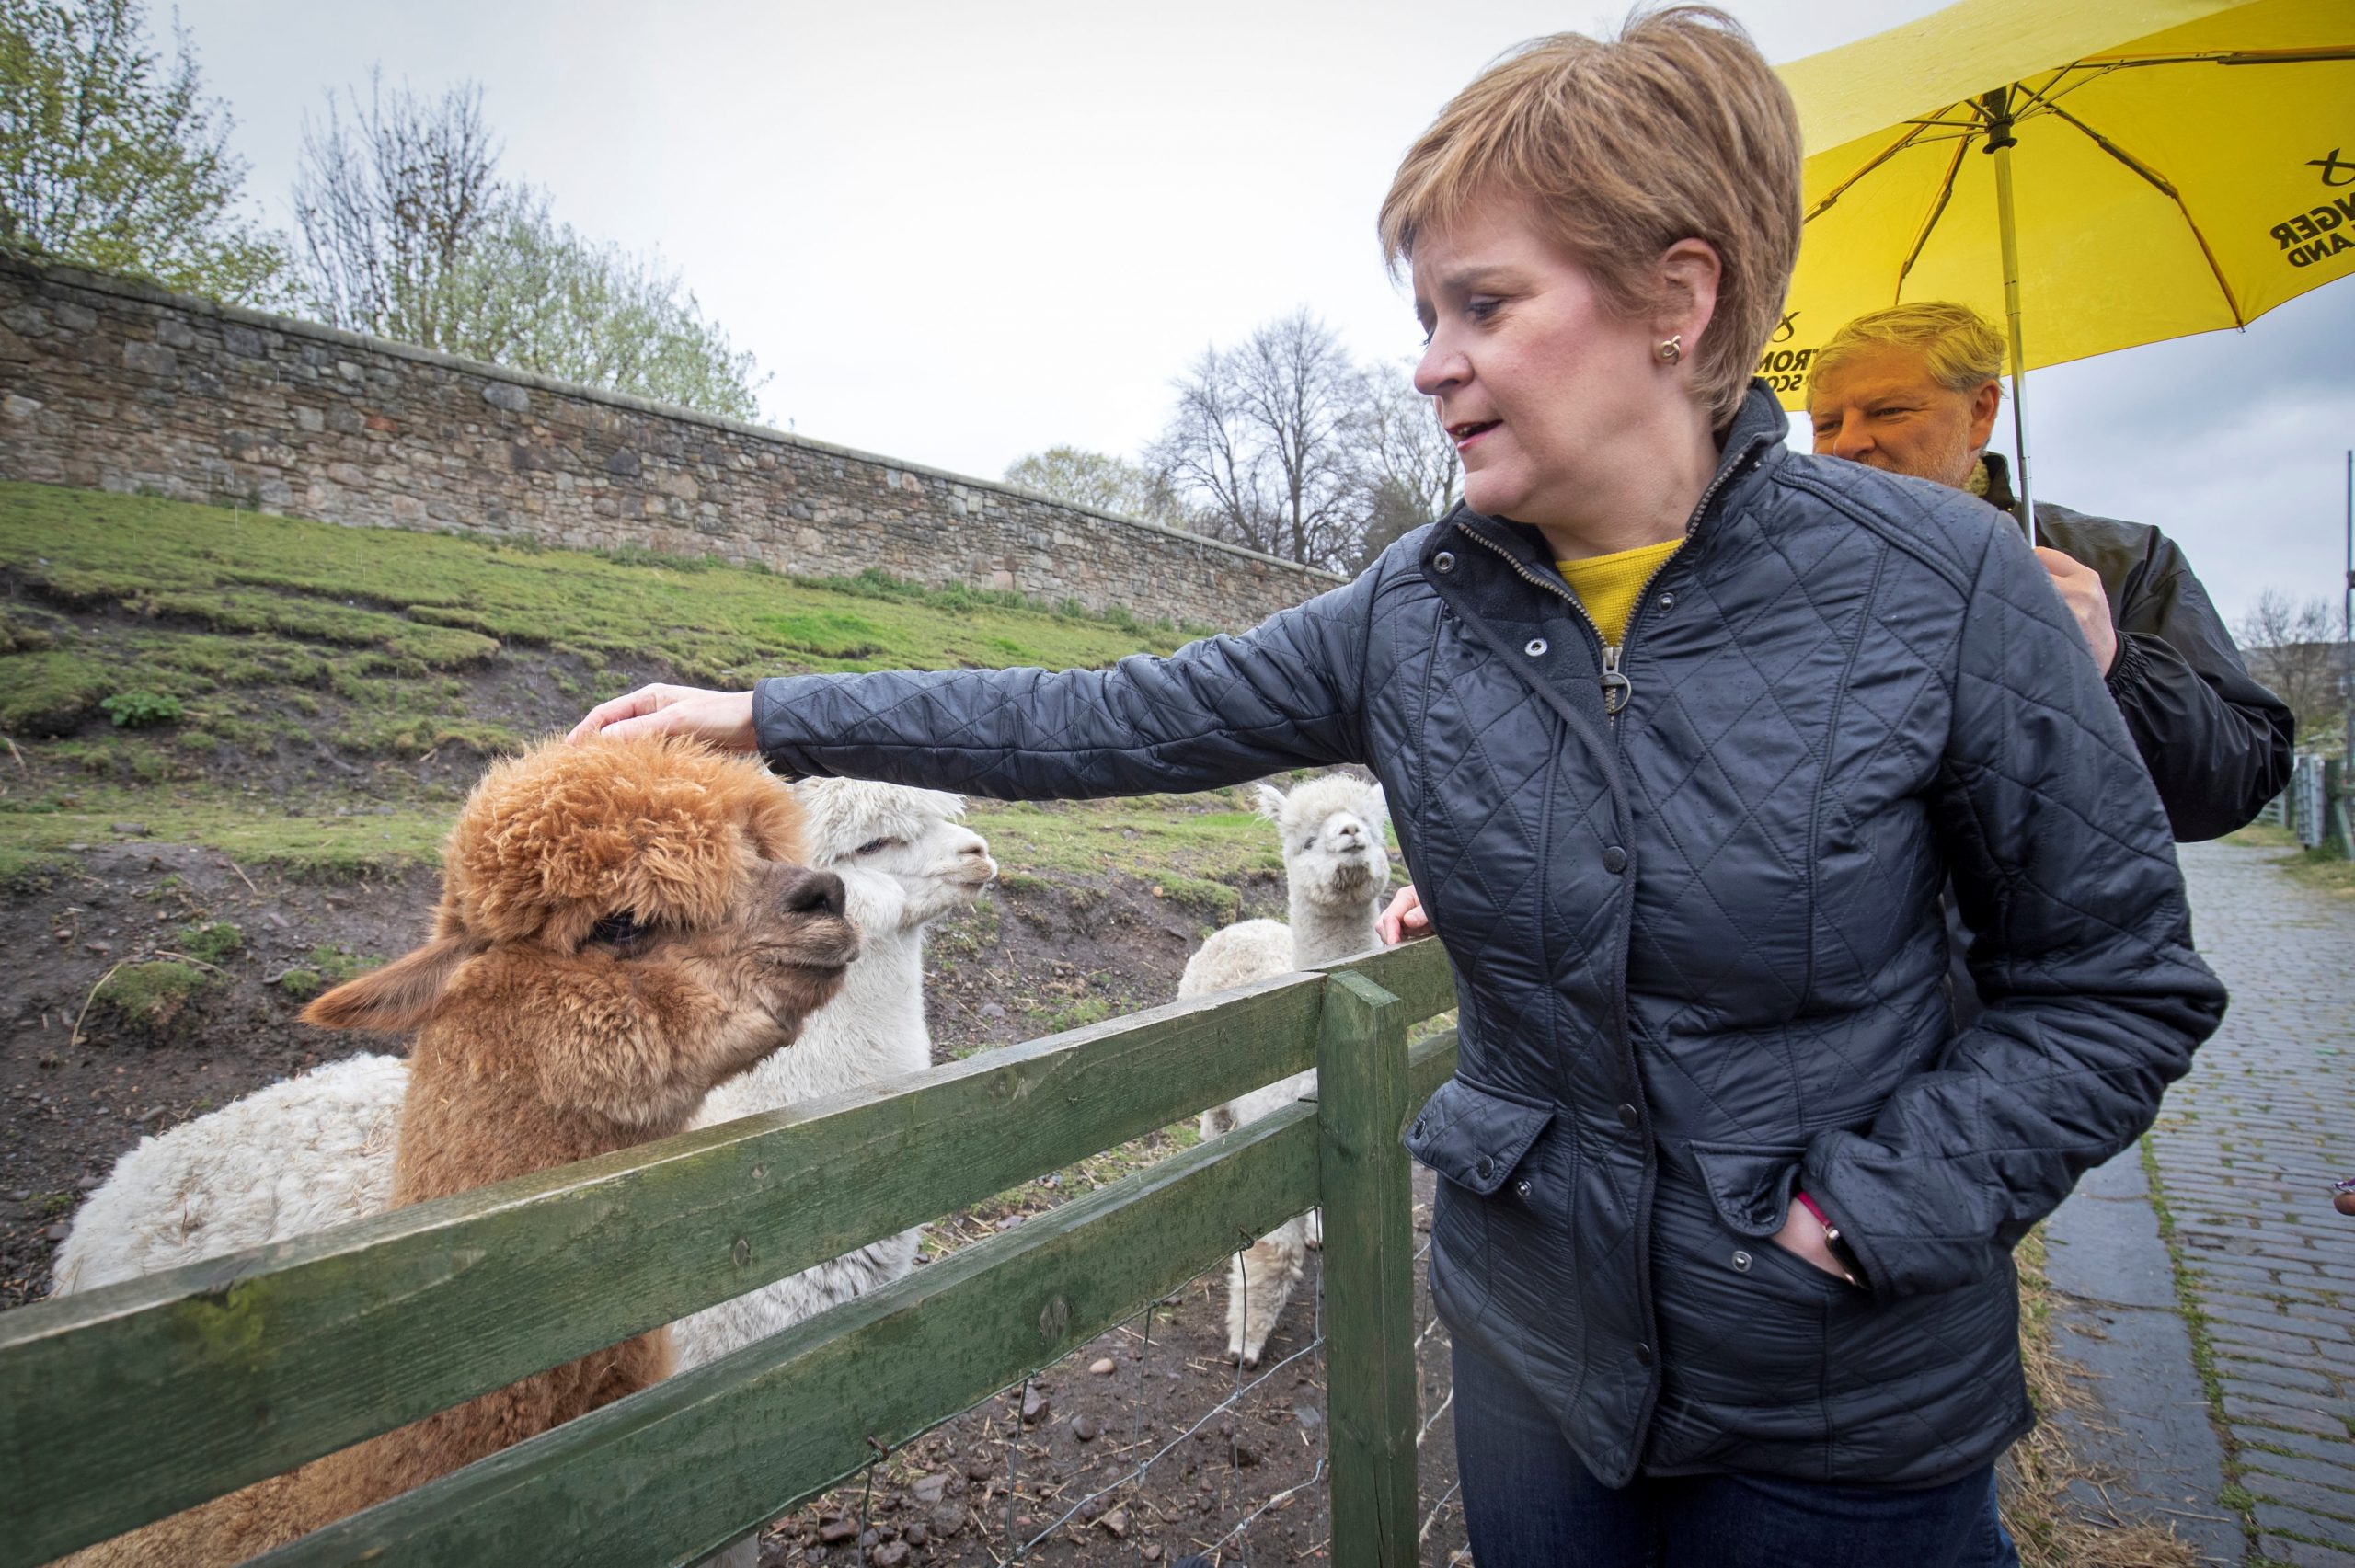 Scotland's First Minister and SNP leader Sturgeon campaigns for 2021 Scottish parliament election in Edinburgh Scotland's First Minister and leader of the Scottish National Party (SNP), Nicola Sturgeon meets the alpacas during a visit to LOVE Gorgie Farm in Edinburgh, Scotland, Britain May 4, 2021, ahead of the upcoming Scottish Parliament election. Jane Barlow/Pool via REUTERS POOL